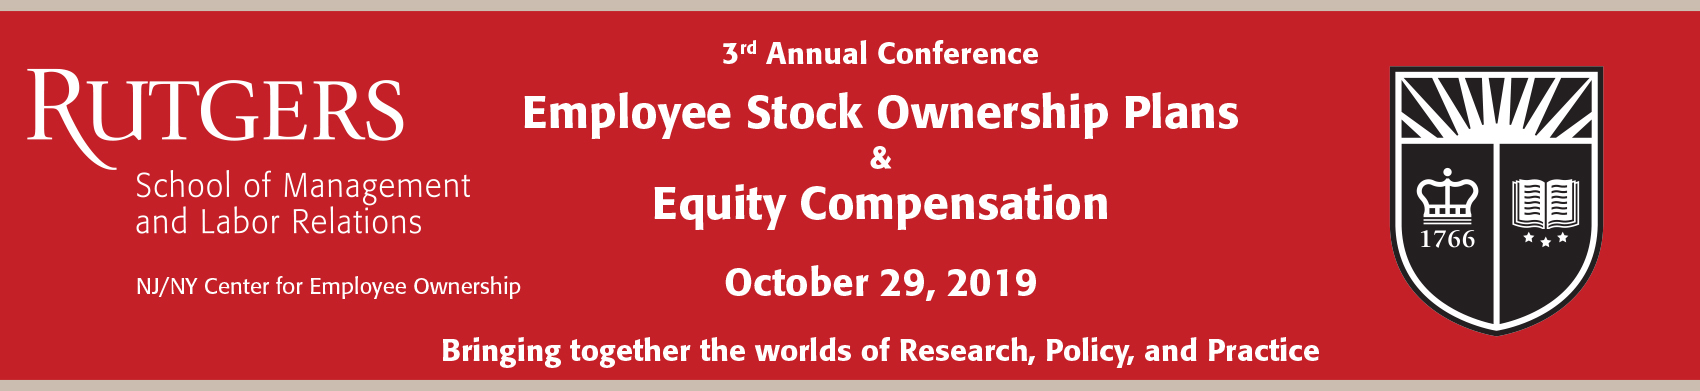 2019 NJ/NY Center for Employee Ownership Annual Conference